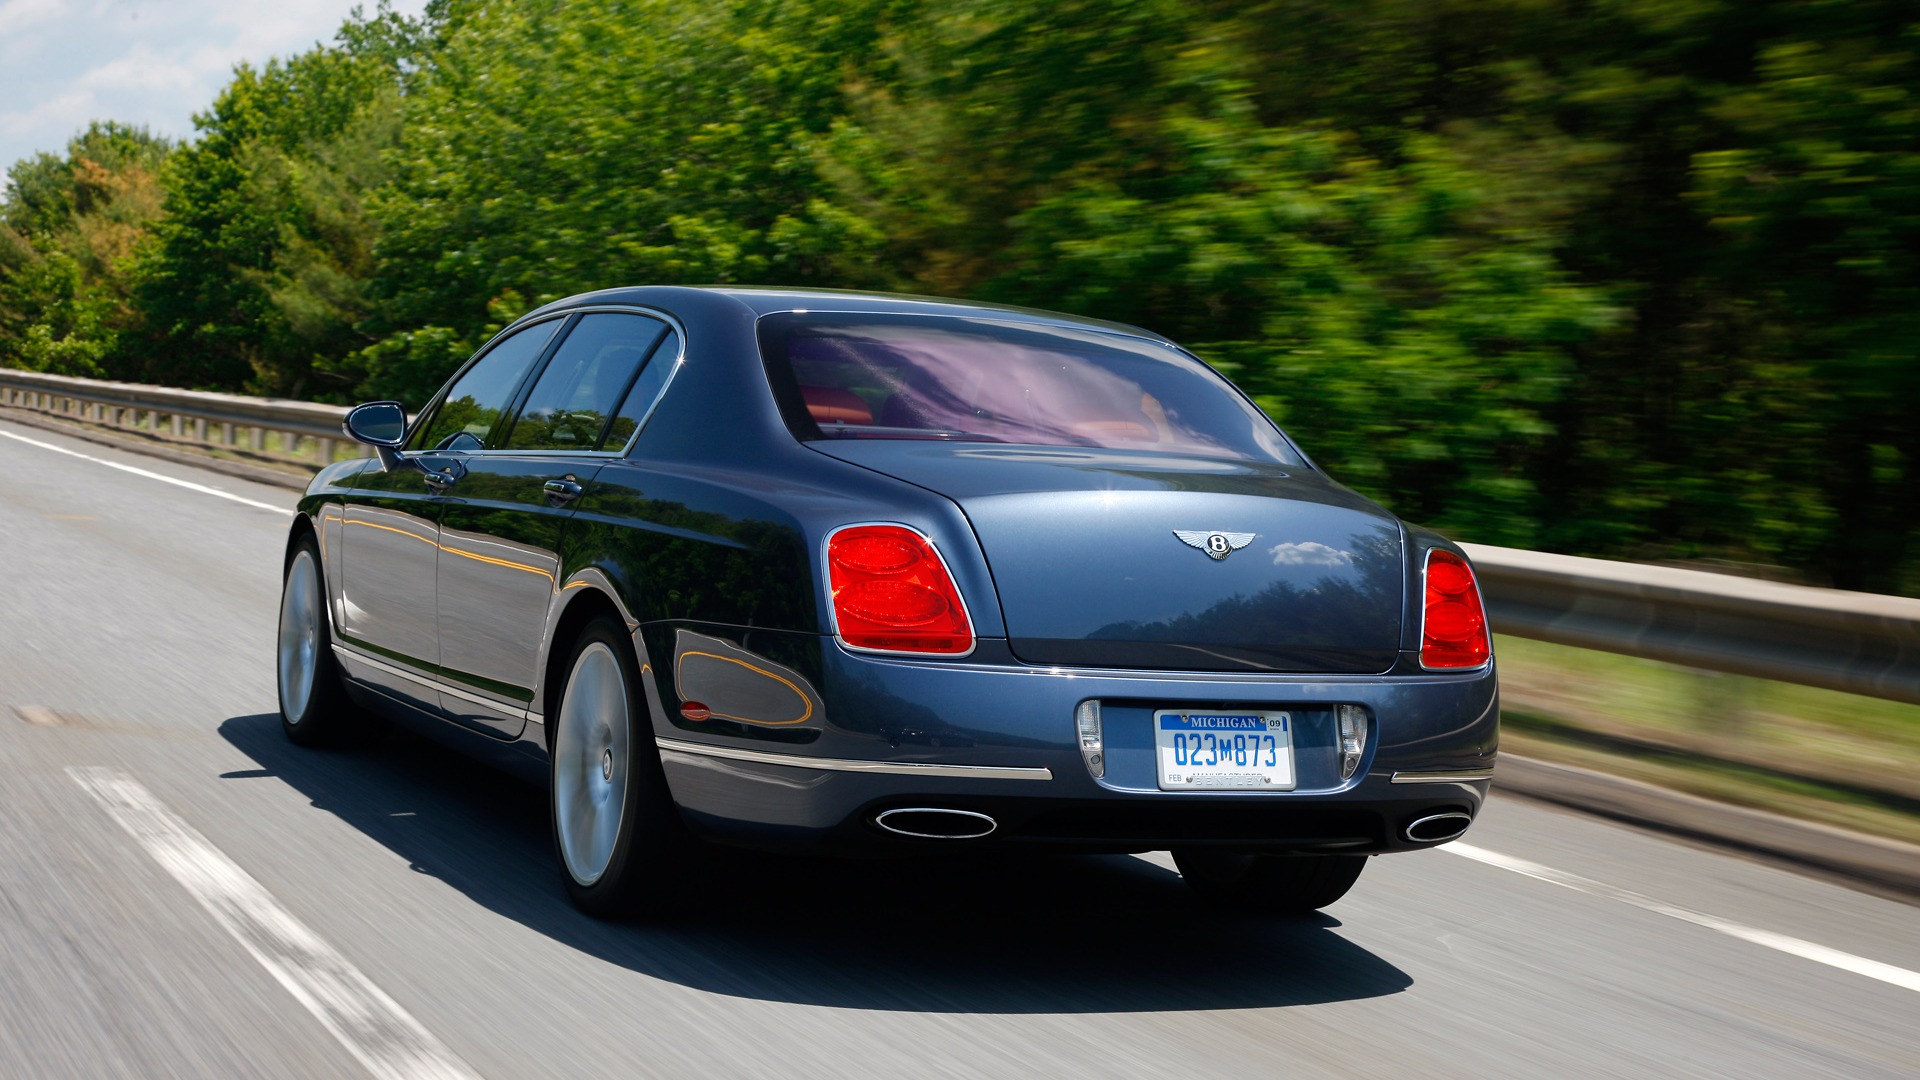 Bentley Continental Flying Spur Speed - 2008 賓利 #12 - 1920x1080